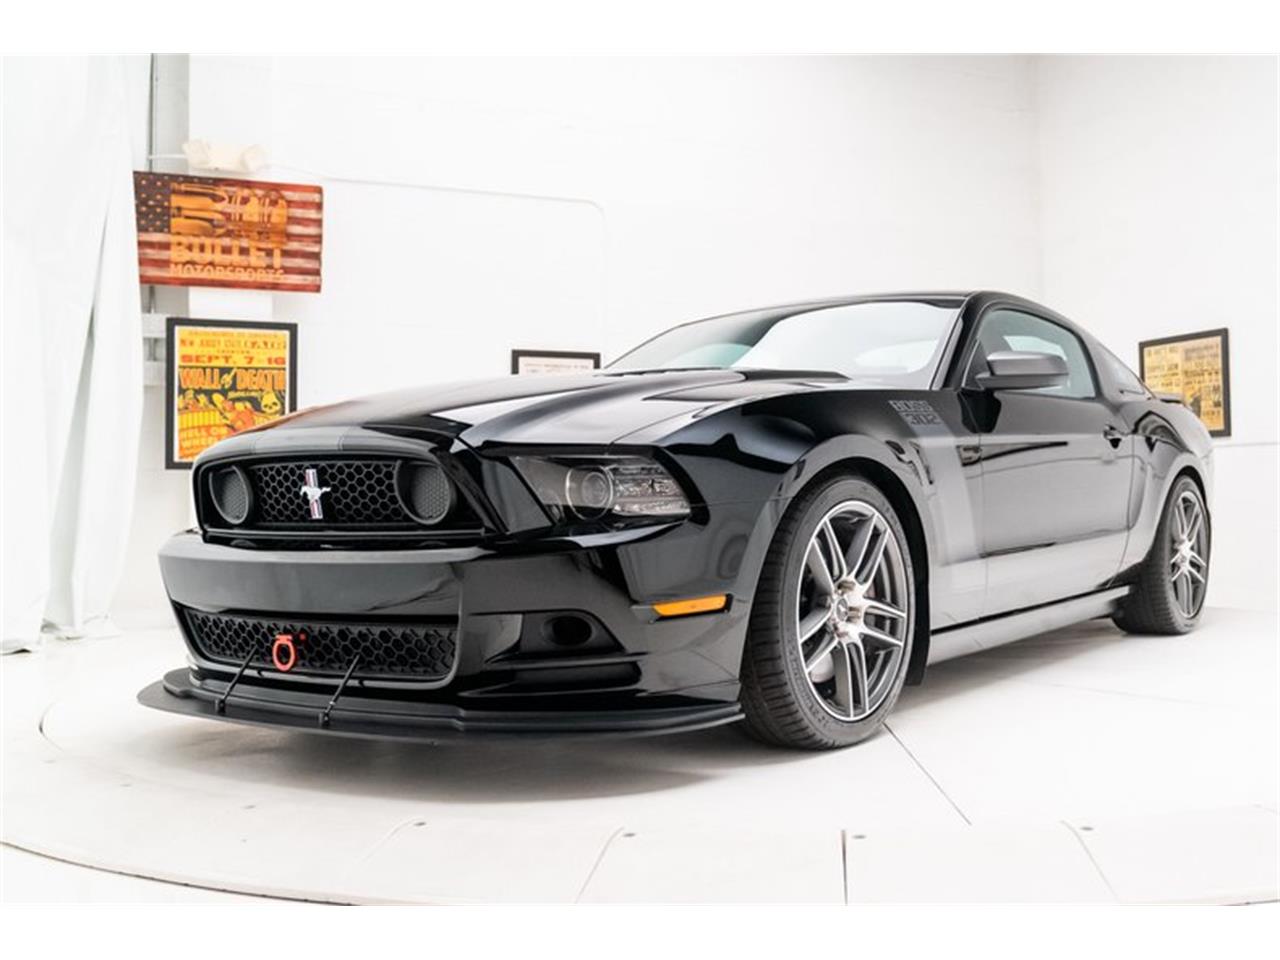 For Sale: 2013 Ford Mustang in Fort Lauderdale, Florida for sale in Fort Lauderdale, FL